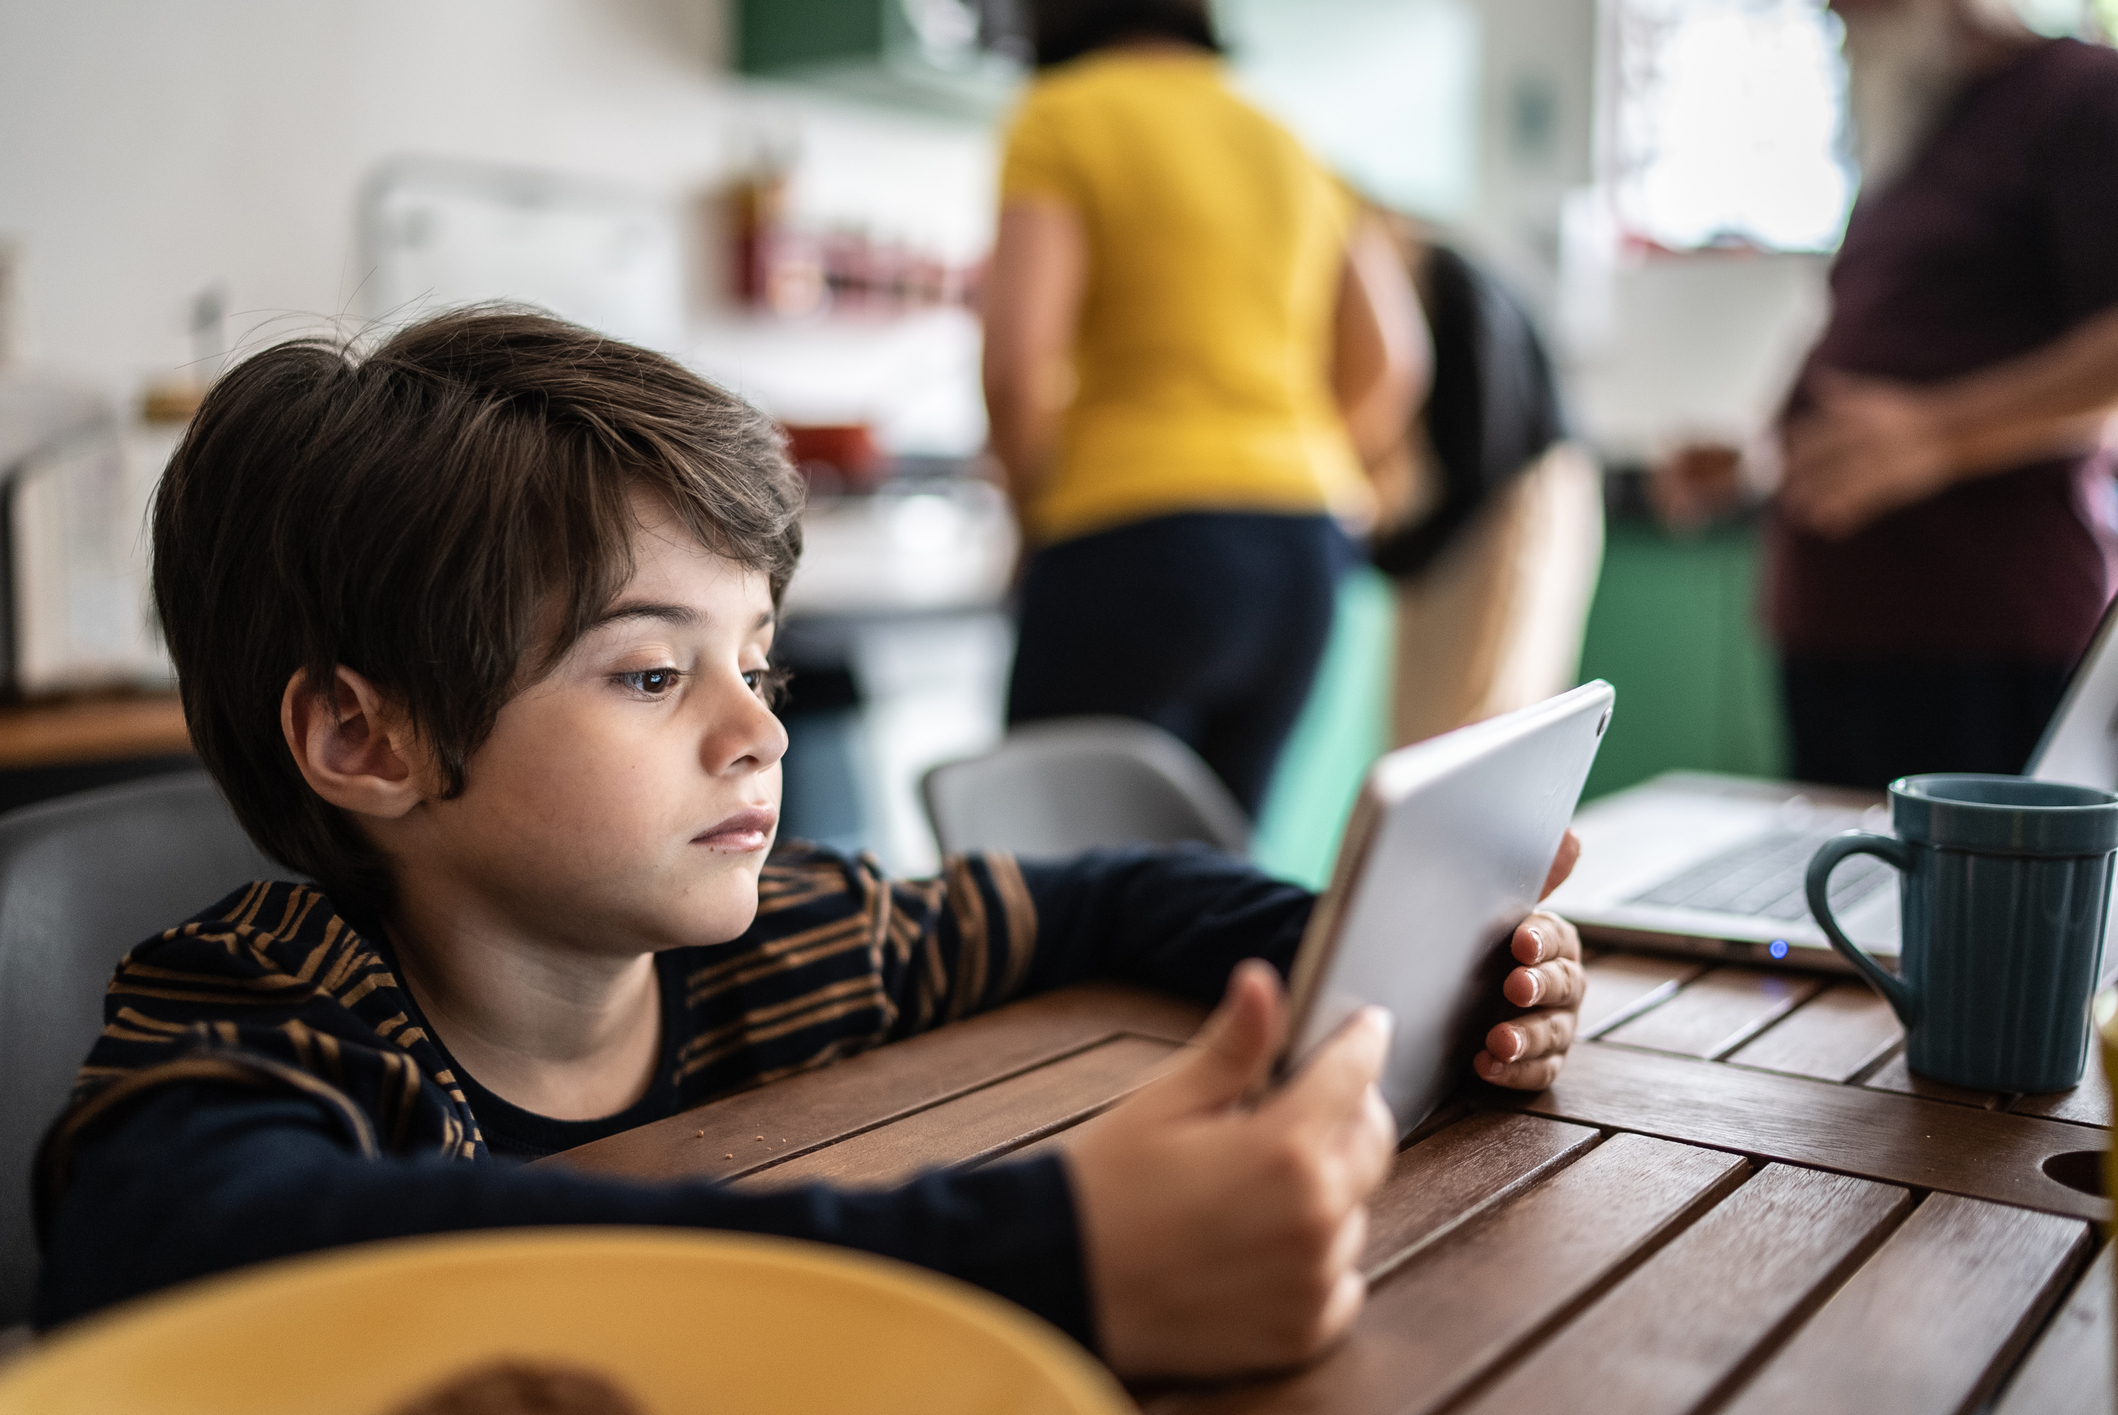 Child at a table holding a tablet with adults in the background